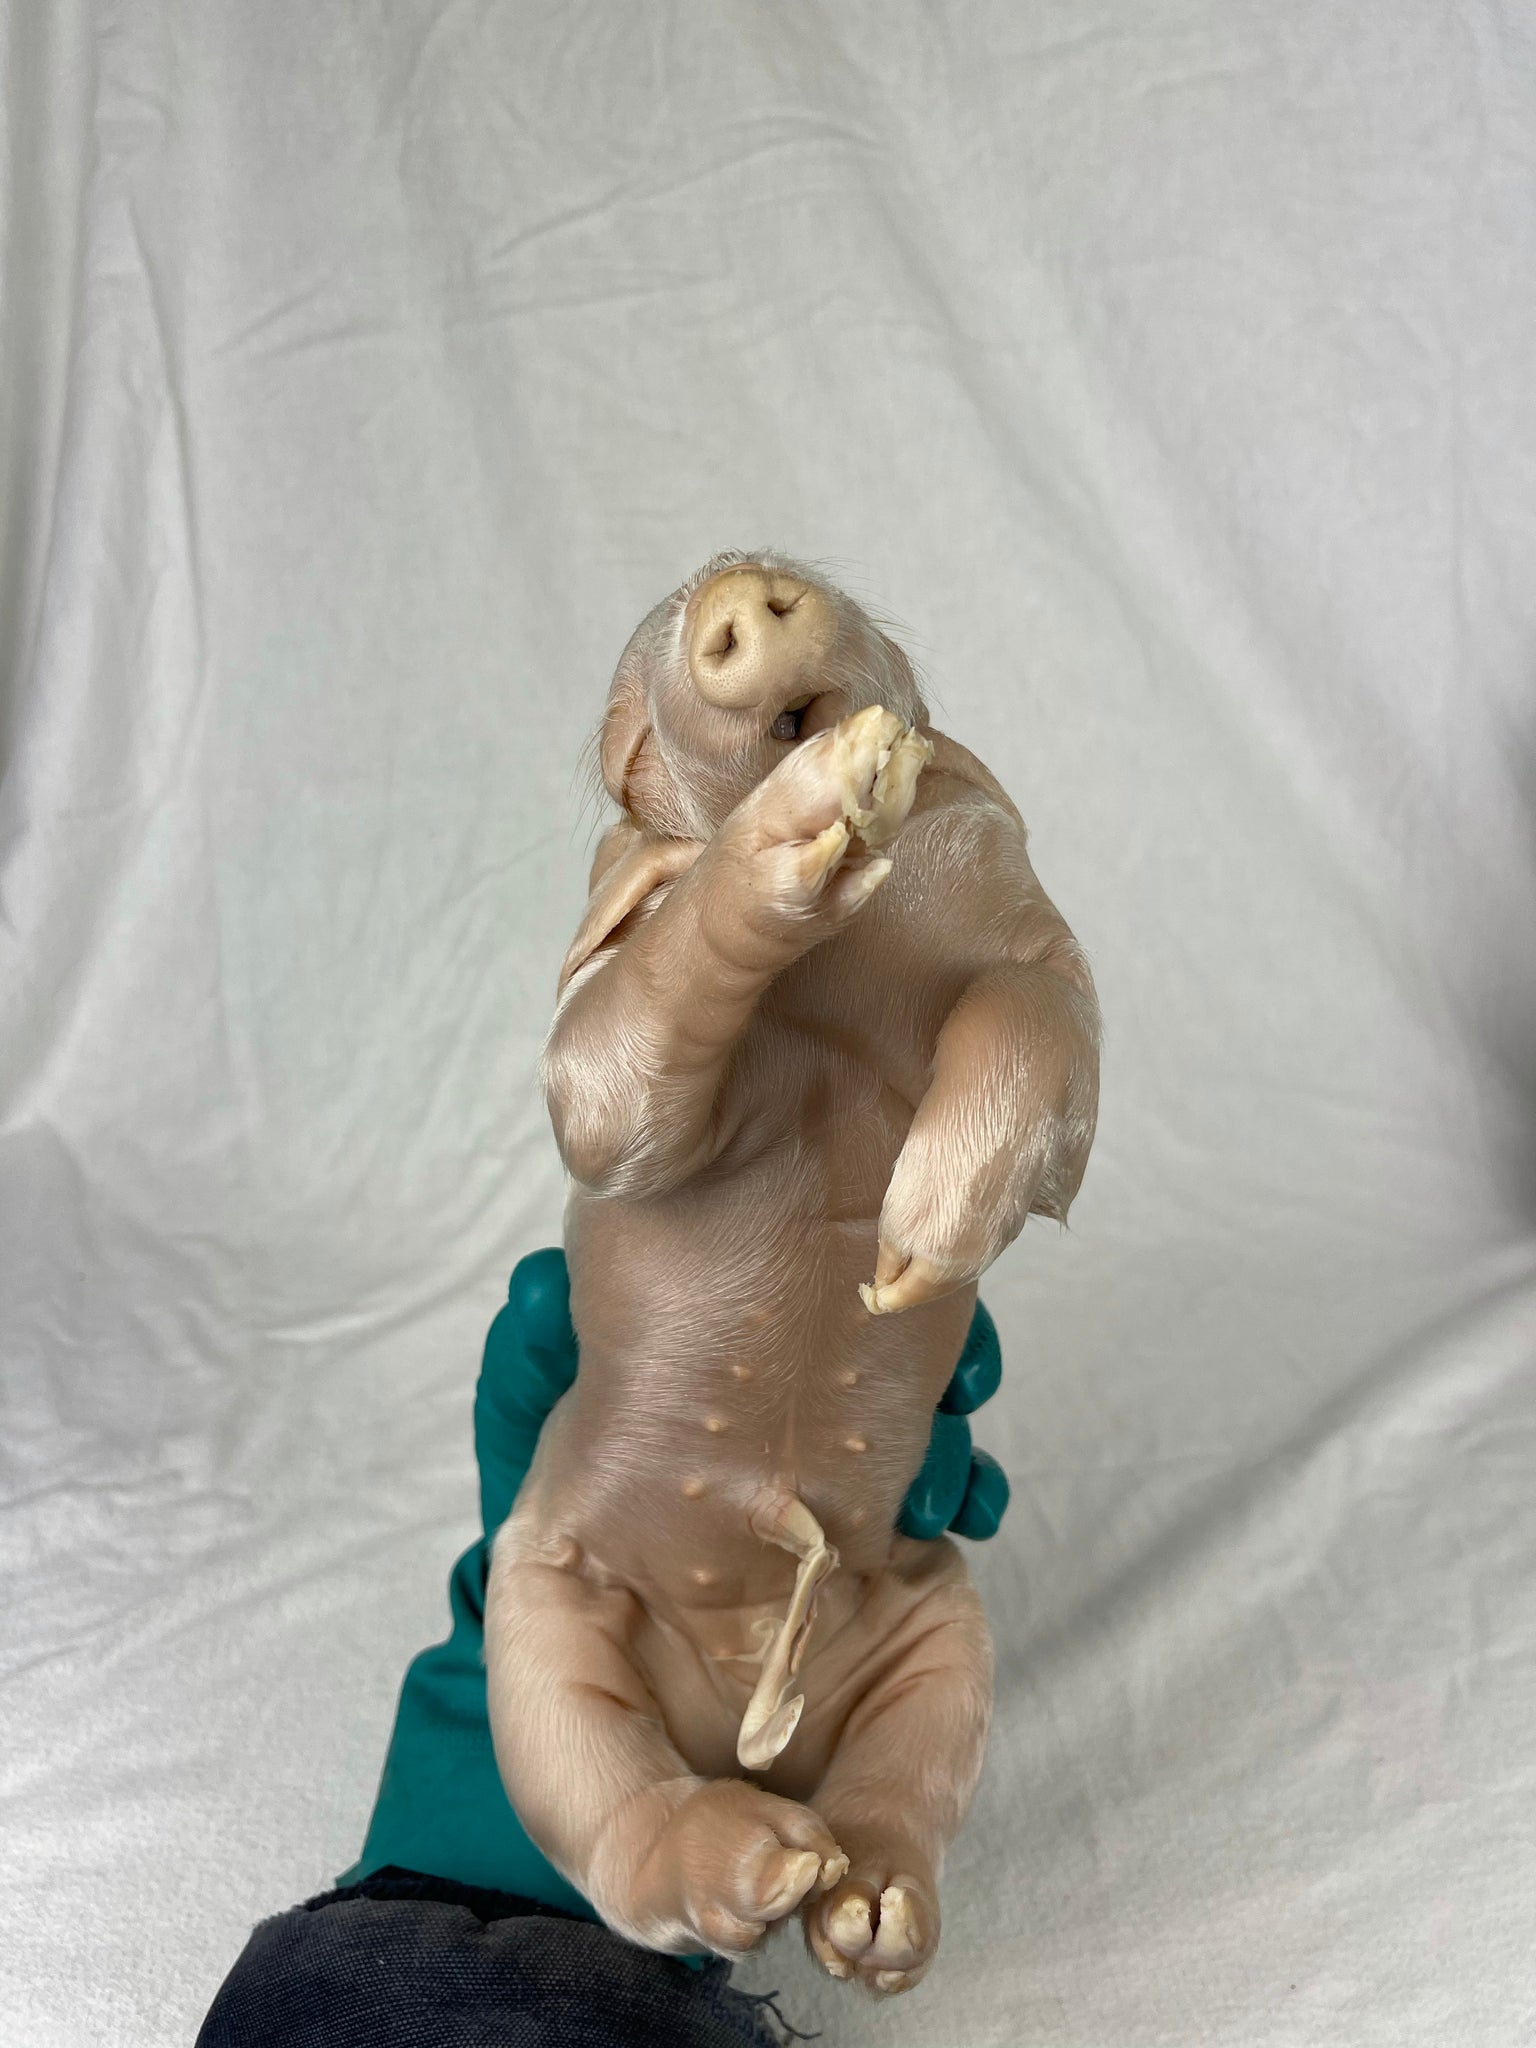 Reserved For Mariah - Wet Specimen Piglet with Congenital Disorders